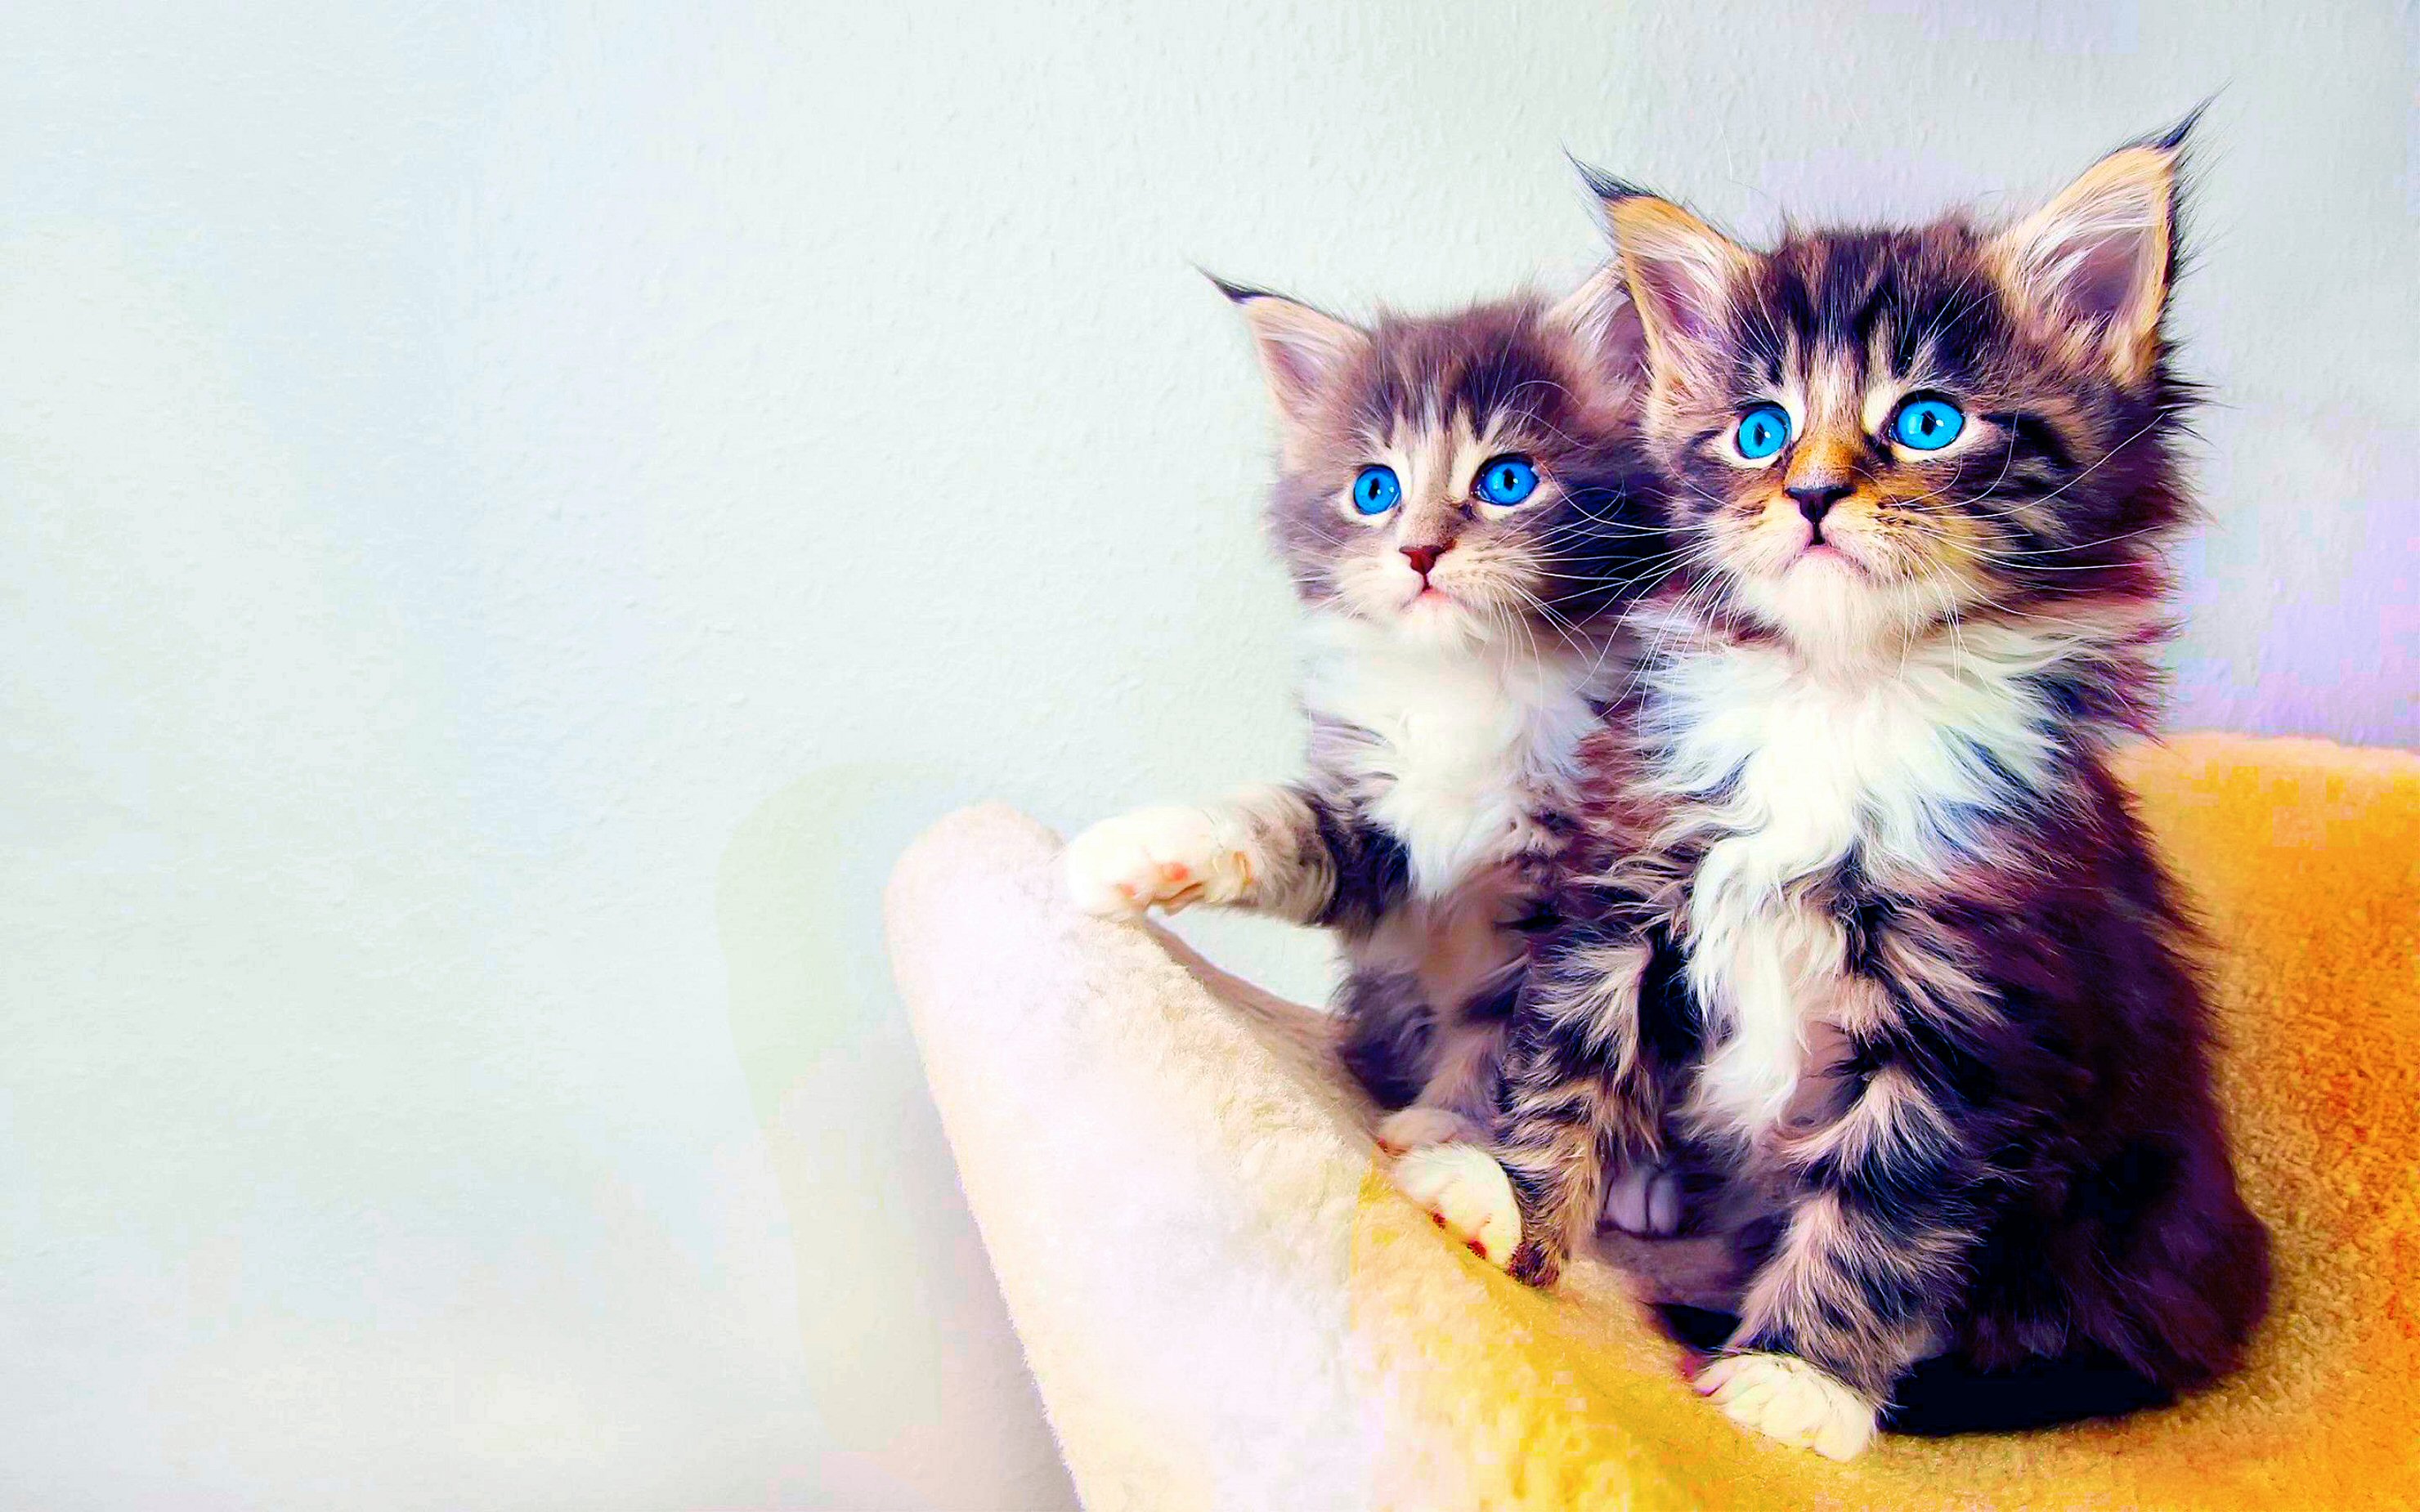 Cute Kitten Wallpaper Those Can Make Your Day Instantly Us Publish